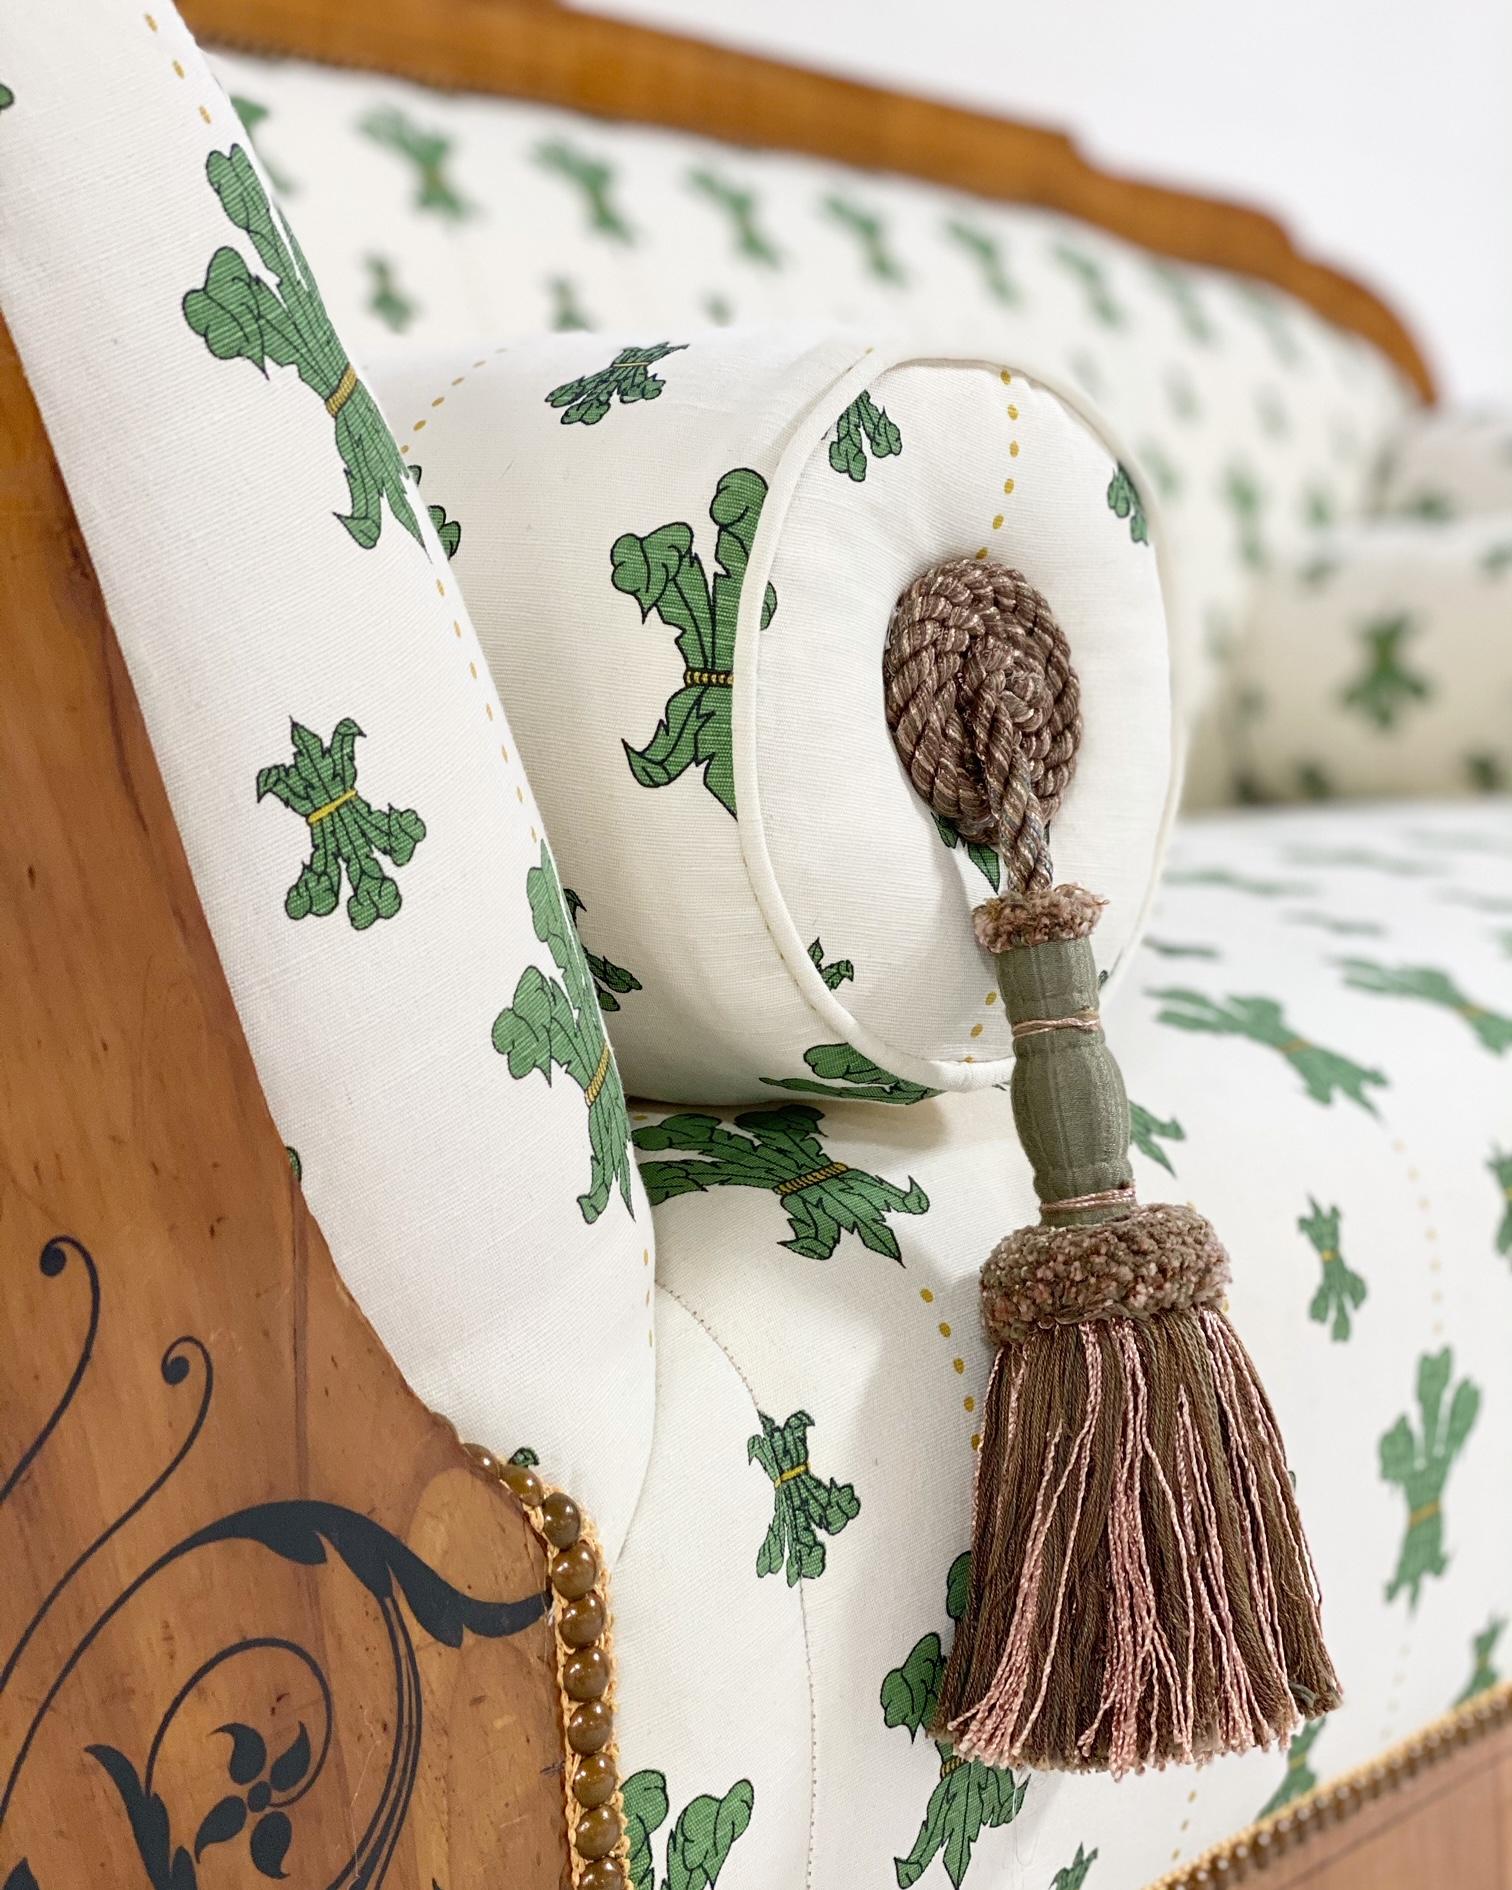 After acquiring this beautiful Biedermeier sofa, we knew we wanted something special for the fabric restoration. So, we turned to our fave designer's line, Beata Heuman. Her Florentine flowers was a match made in heaven for this piece. From Beata